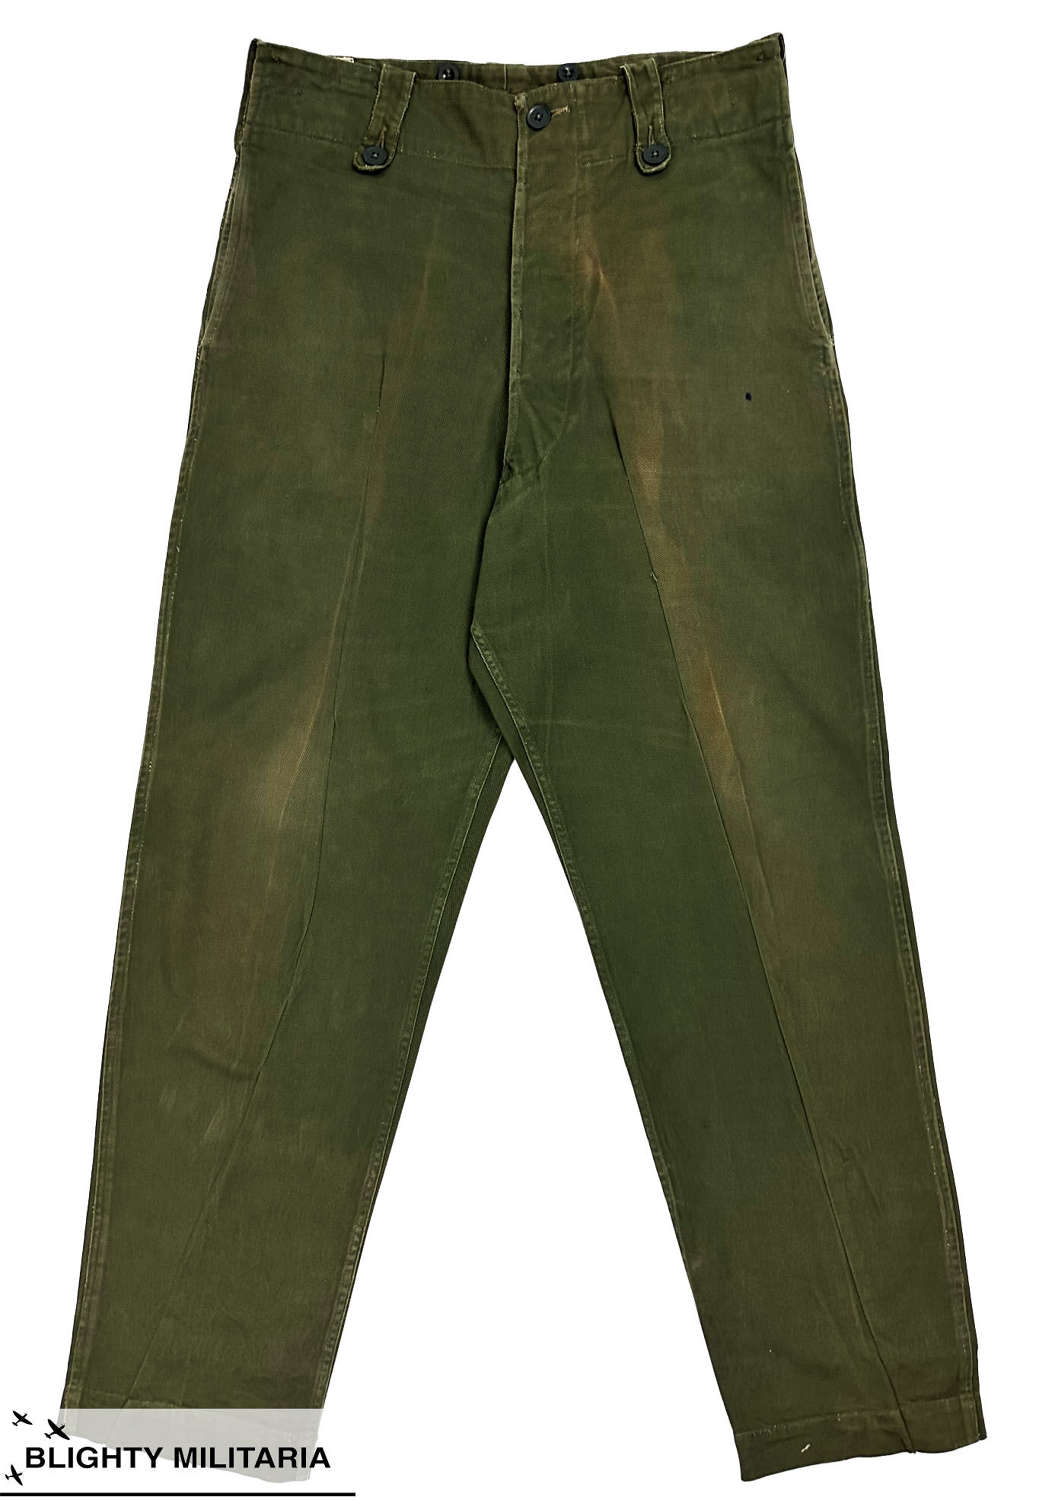 Original 1966 Dated Overall Green Trousers - Size 5 33x30.5